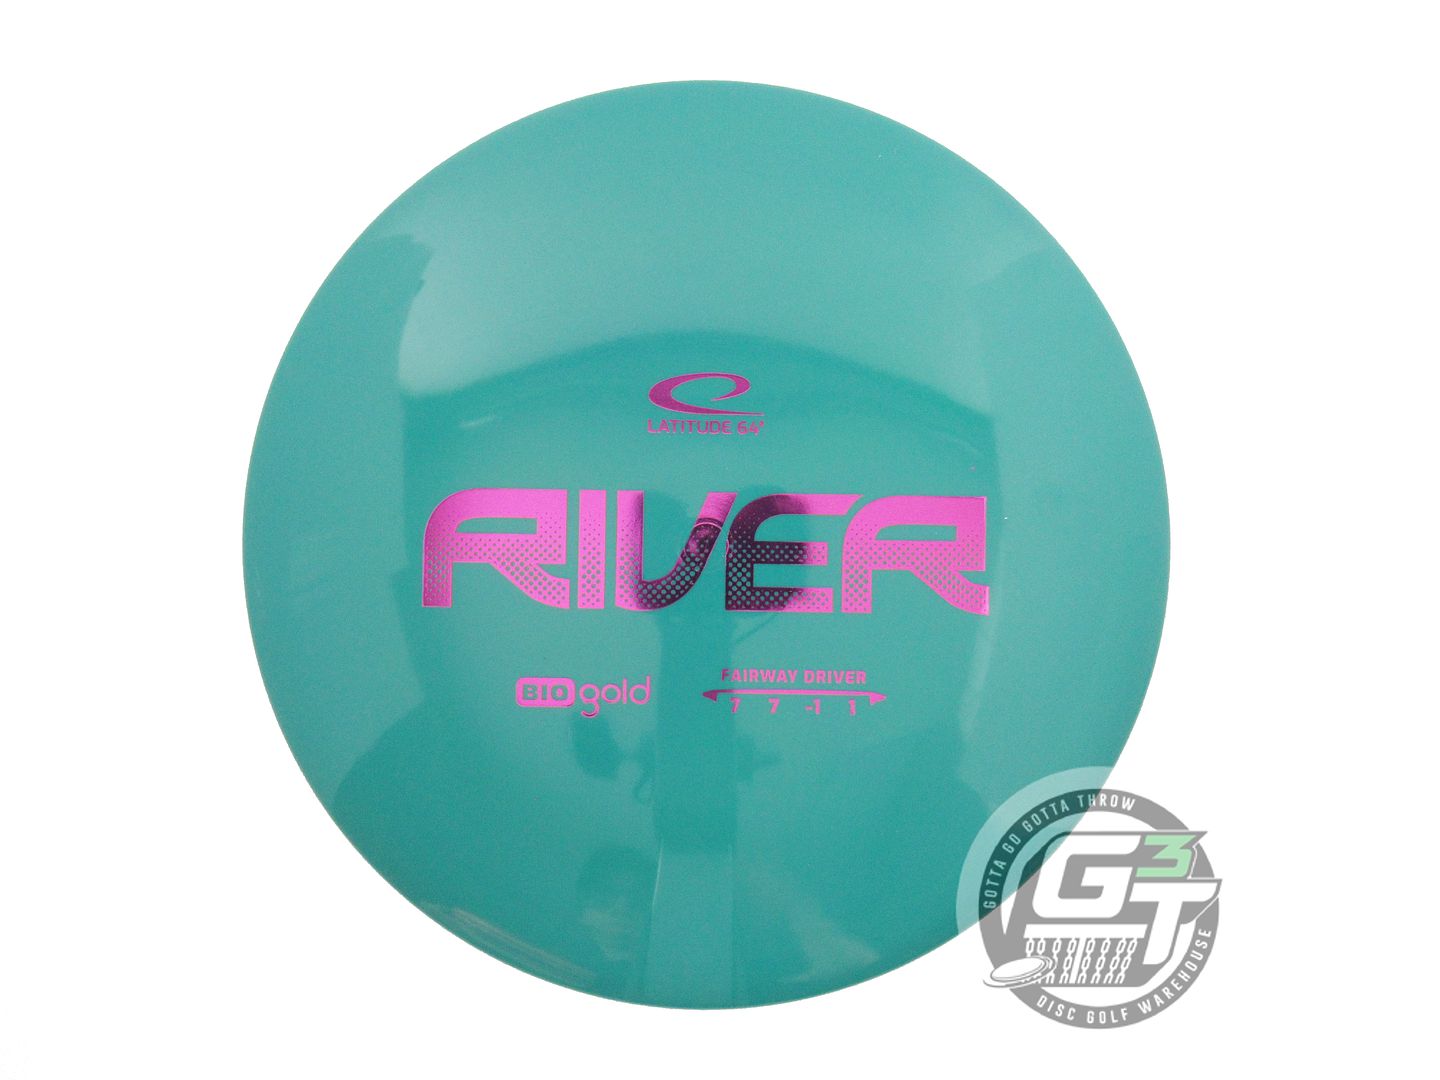 Latitude 64 BioGold River Fairway Driver Golf Disc (Individually Listed)